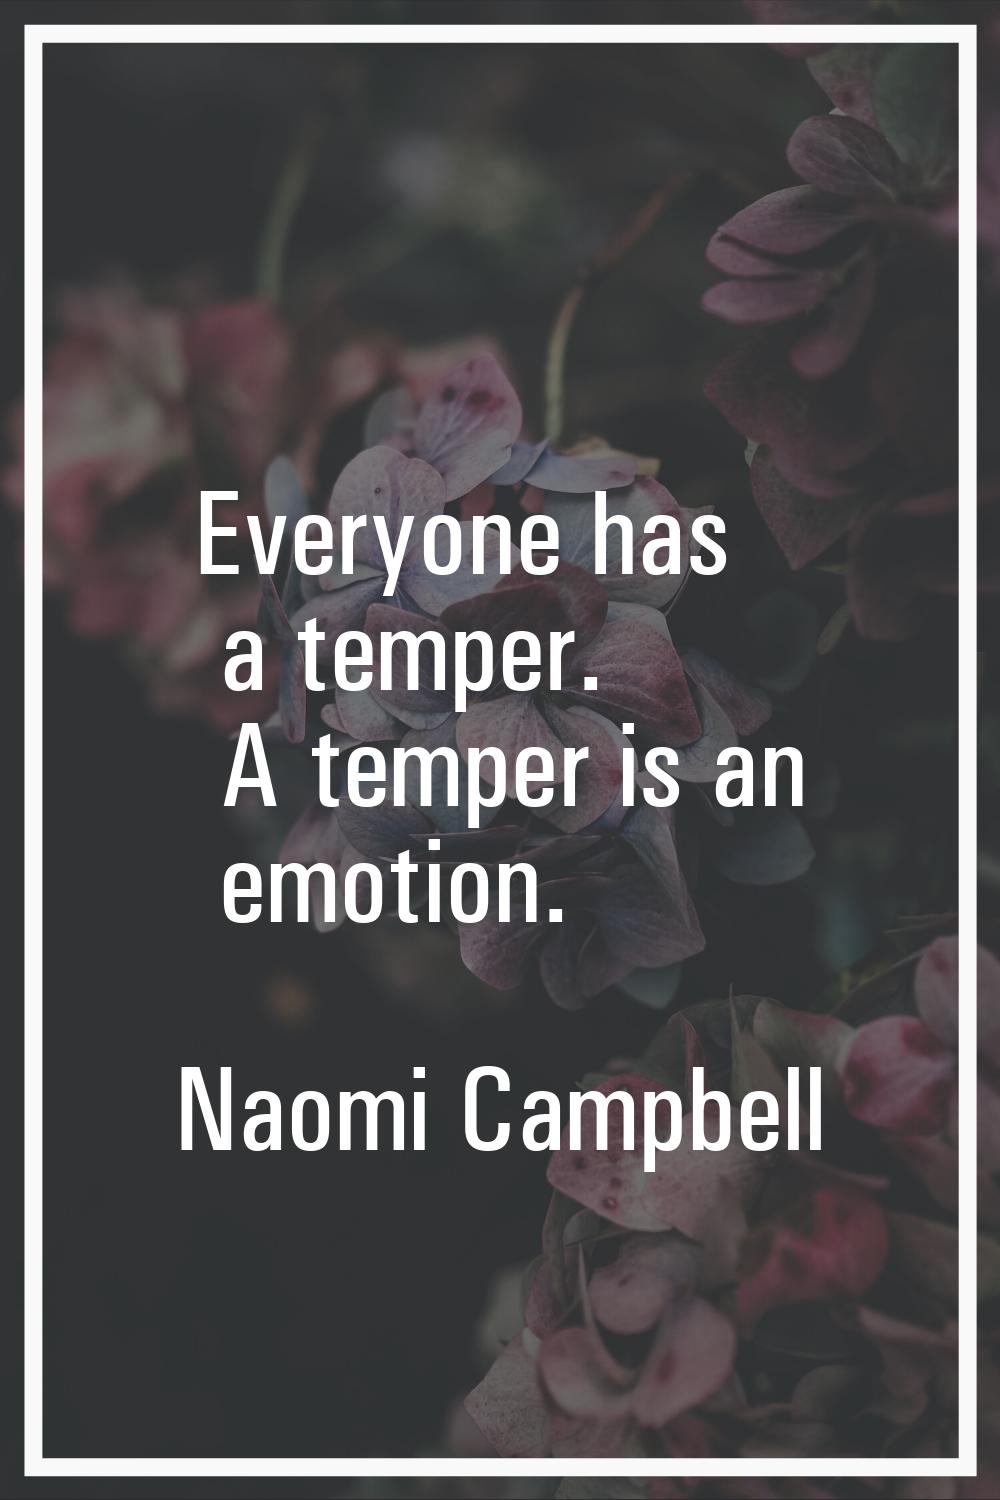 Everyone has a temper. A temper is an emotion.